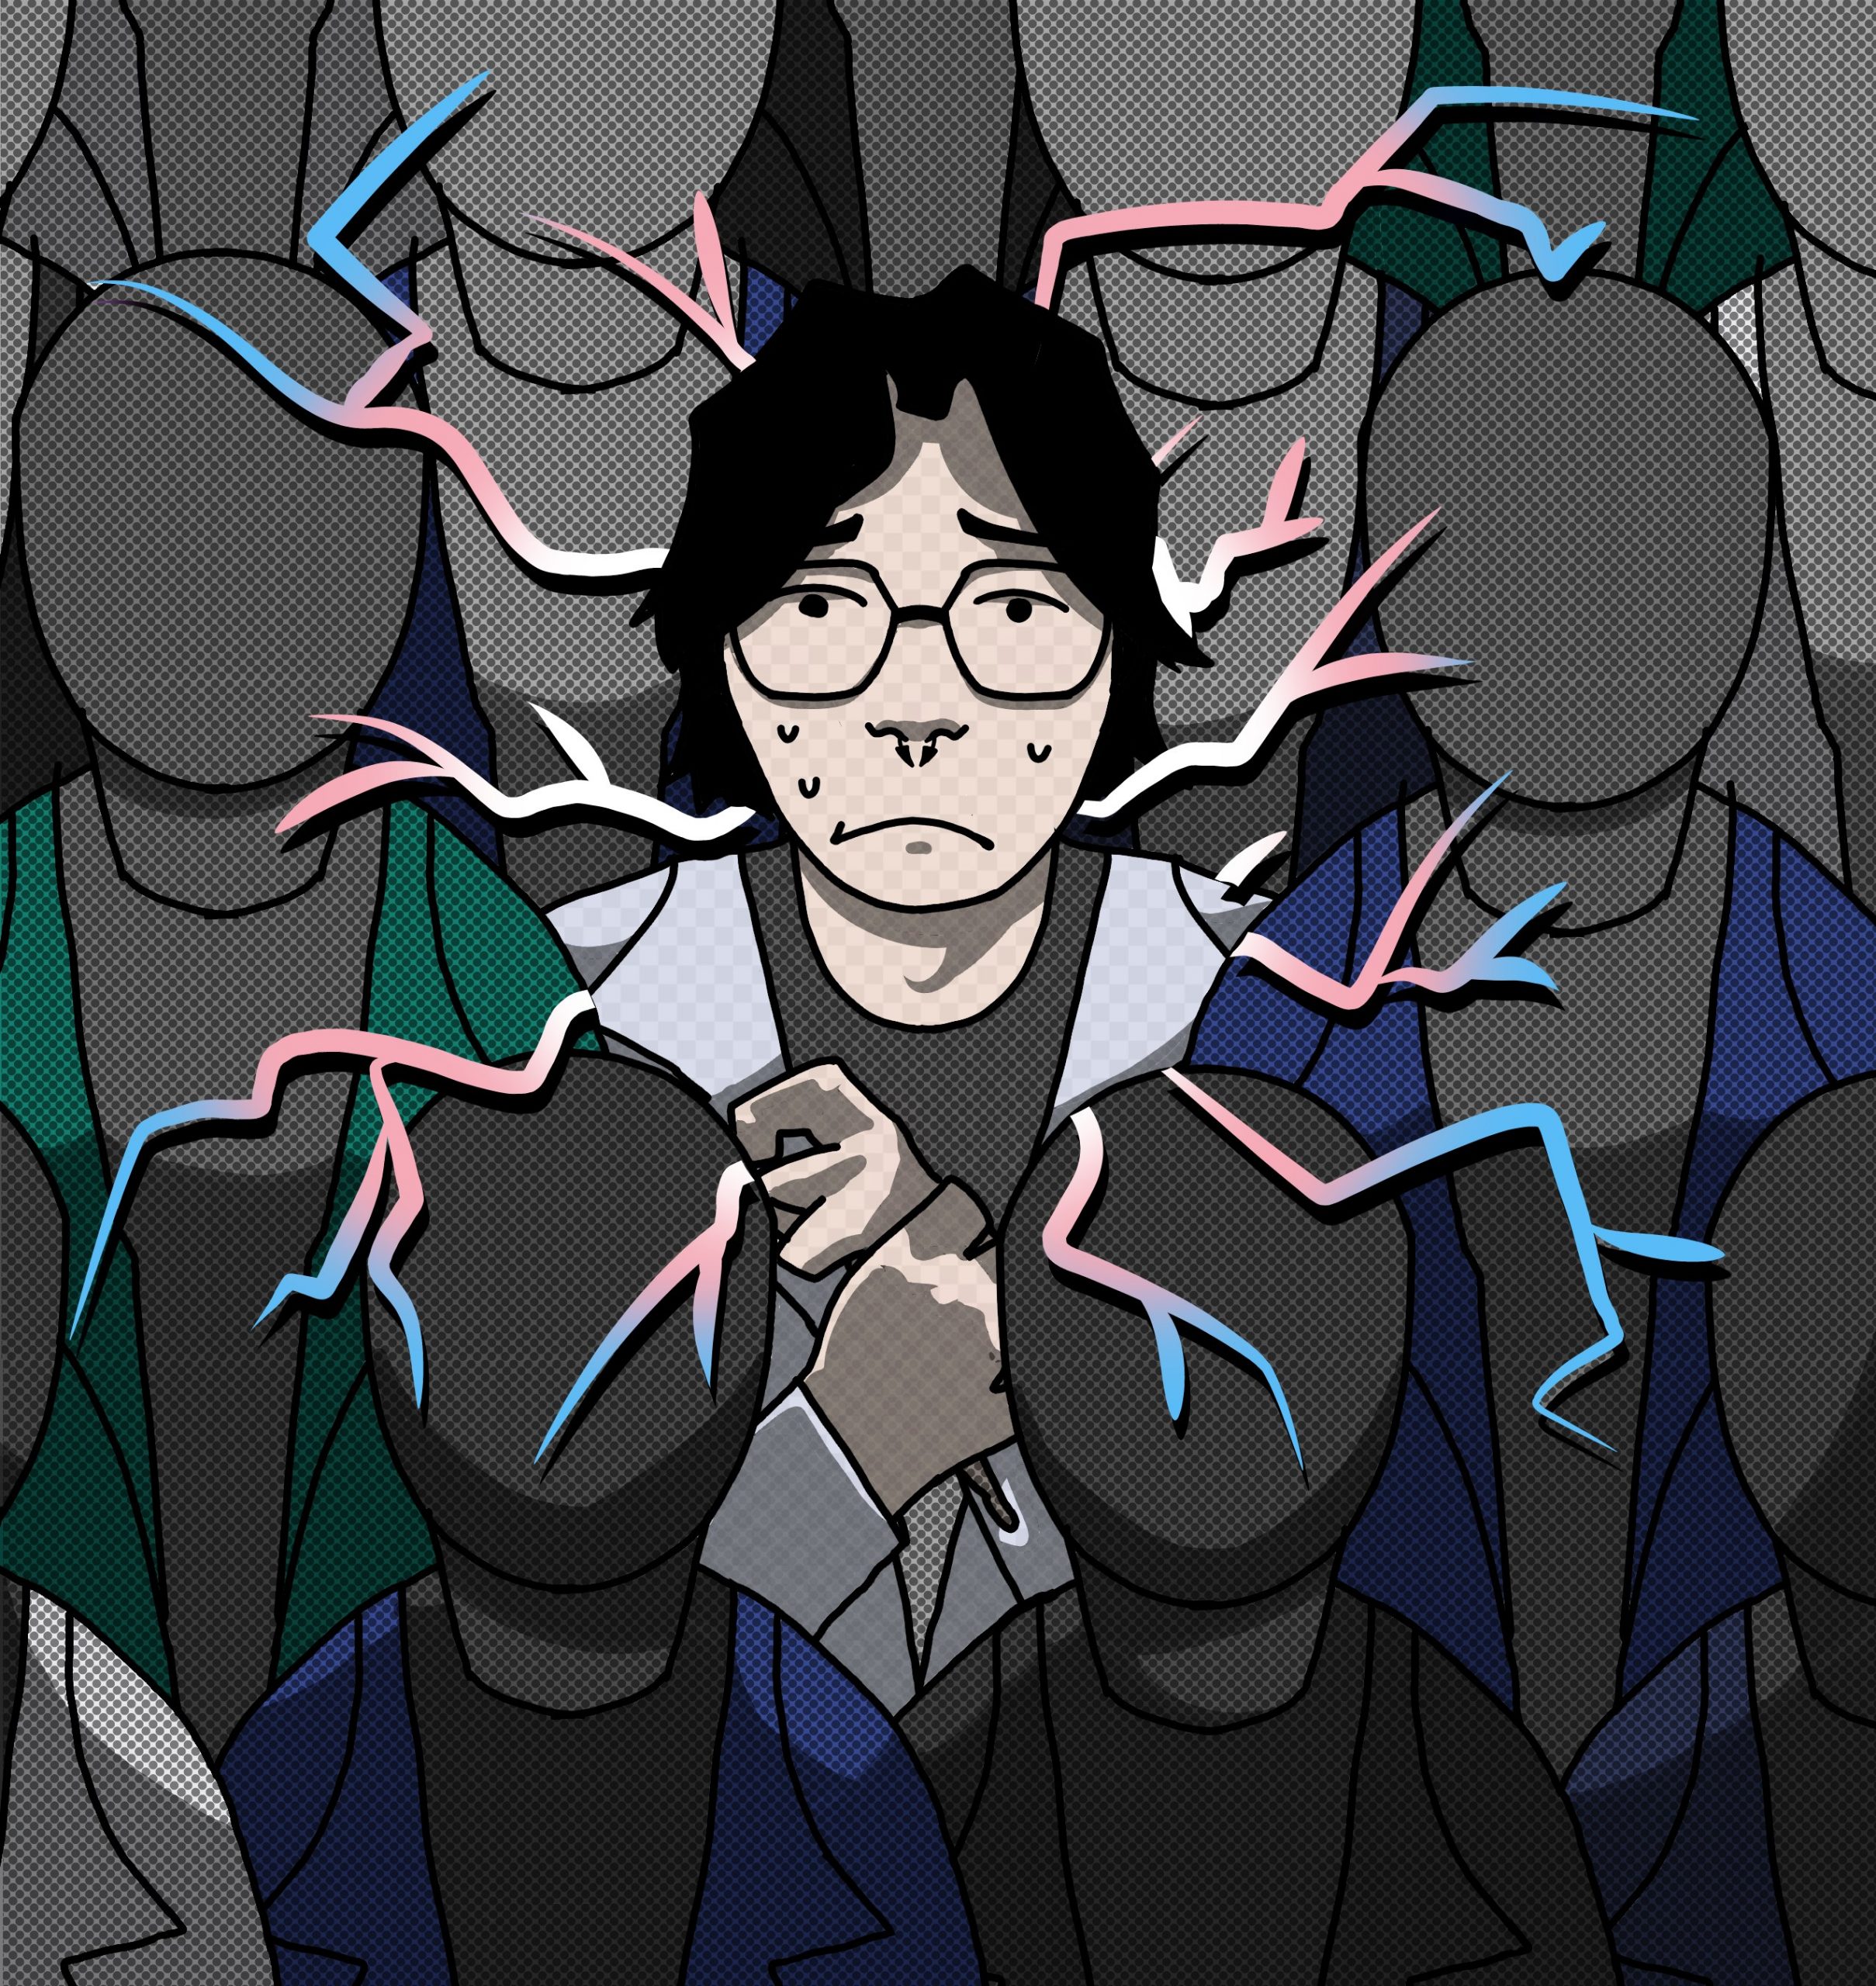 A digital illustration of Claude, a masc Korean person with glasses and a septum ring. He has dark hair and light skin and is visibly anxious. Cracks in the colors of the trans flag spread out from around him. They are surrounded by faceless gray people.